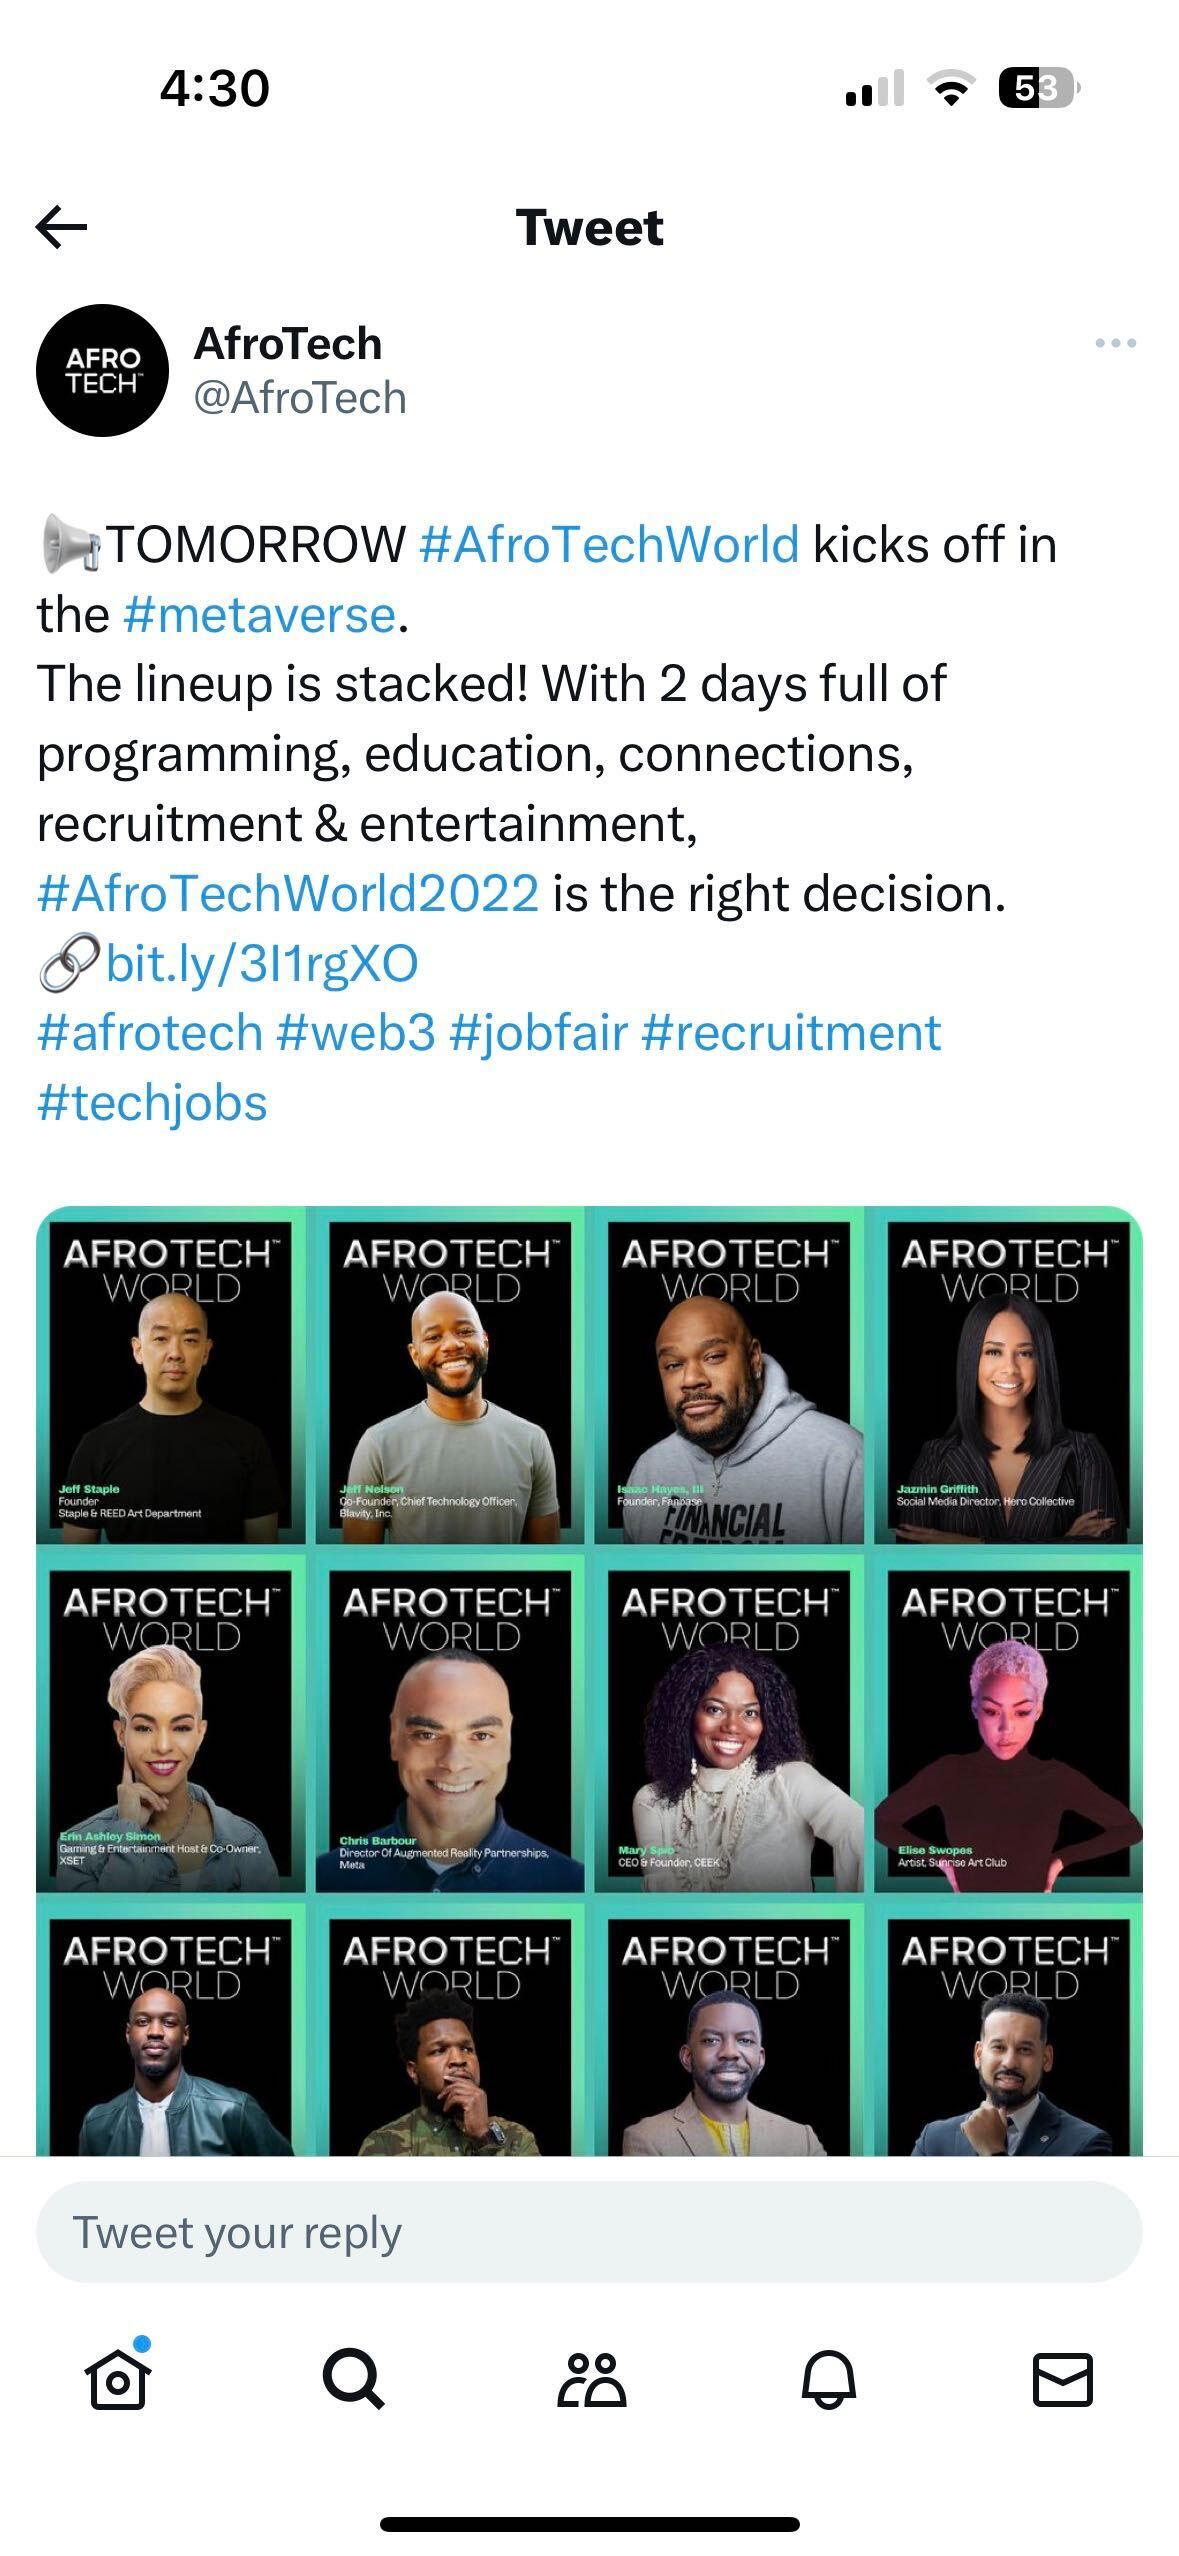 AfroTech Tweet with several event hashtags including #AfroTechWorld and #AfroTechWorld2022. 